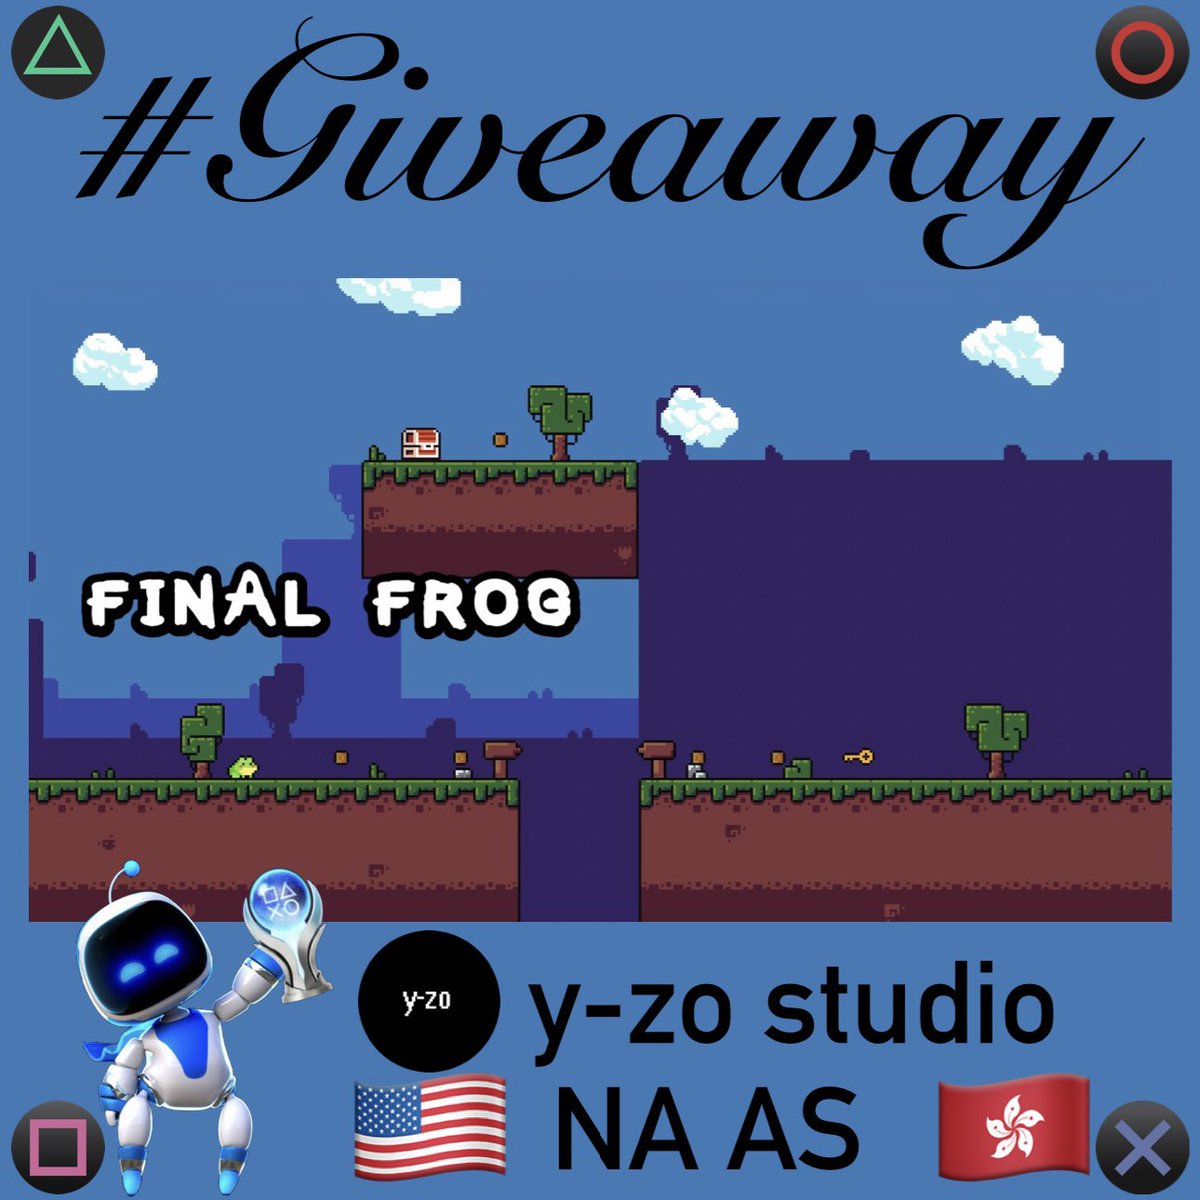 #Giveaway Final Frog I have 2x #PSN codes 1x #PS4 NA 🇺🇸 1x #PS4 AS 🇭🇰 If you want a specific one, please comment To win: ☑️ Repost ☑️ Follow 👤@PSN_Robert2567 👤@yzo_studio 👤@PhoenixRebornG Winners announced in 48 hours 🍀 Good Luck to all #GiveawayAlert #PS5